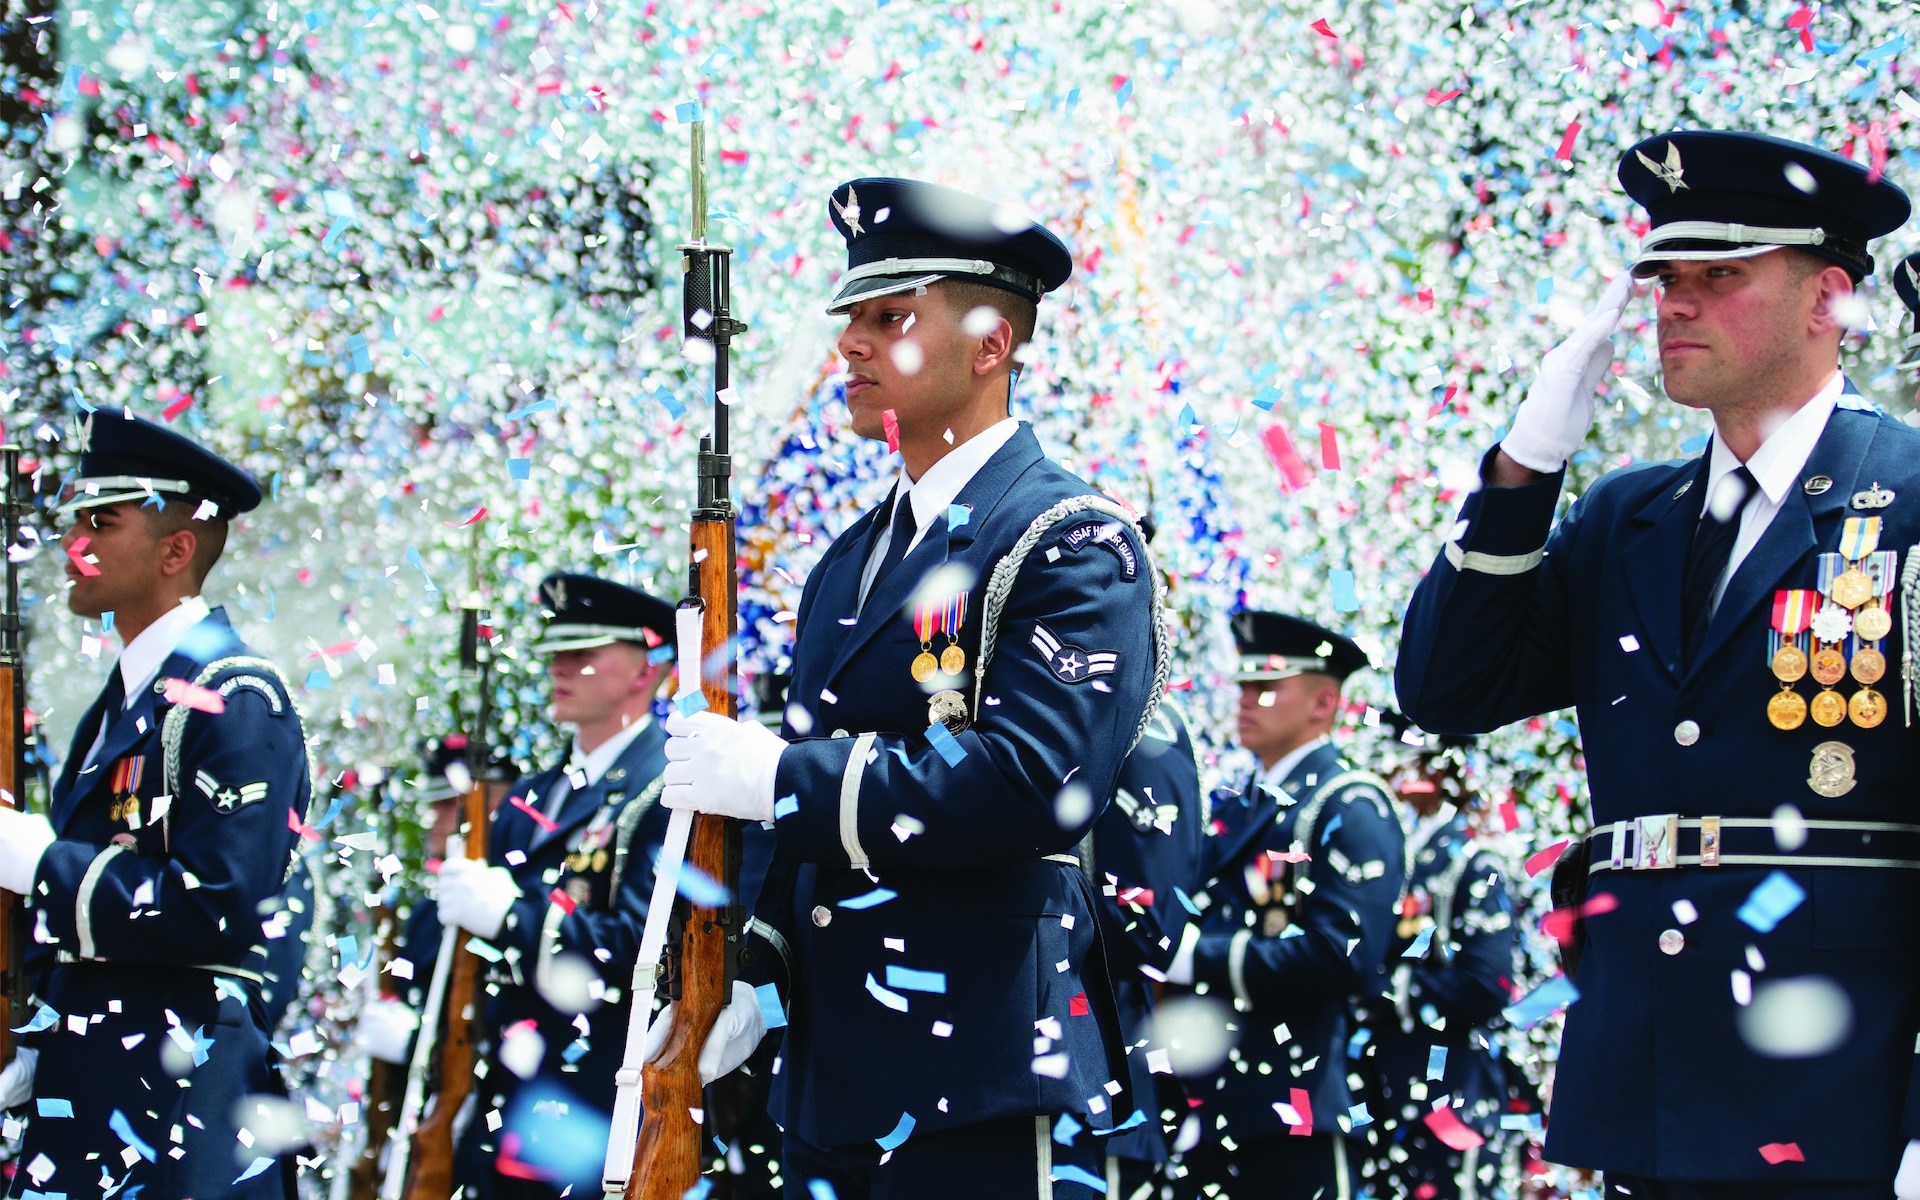 Armed unit of service man dressed in formal uniform standing at attention during a celebration with confetti flying in the air